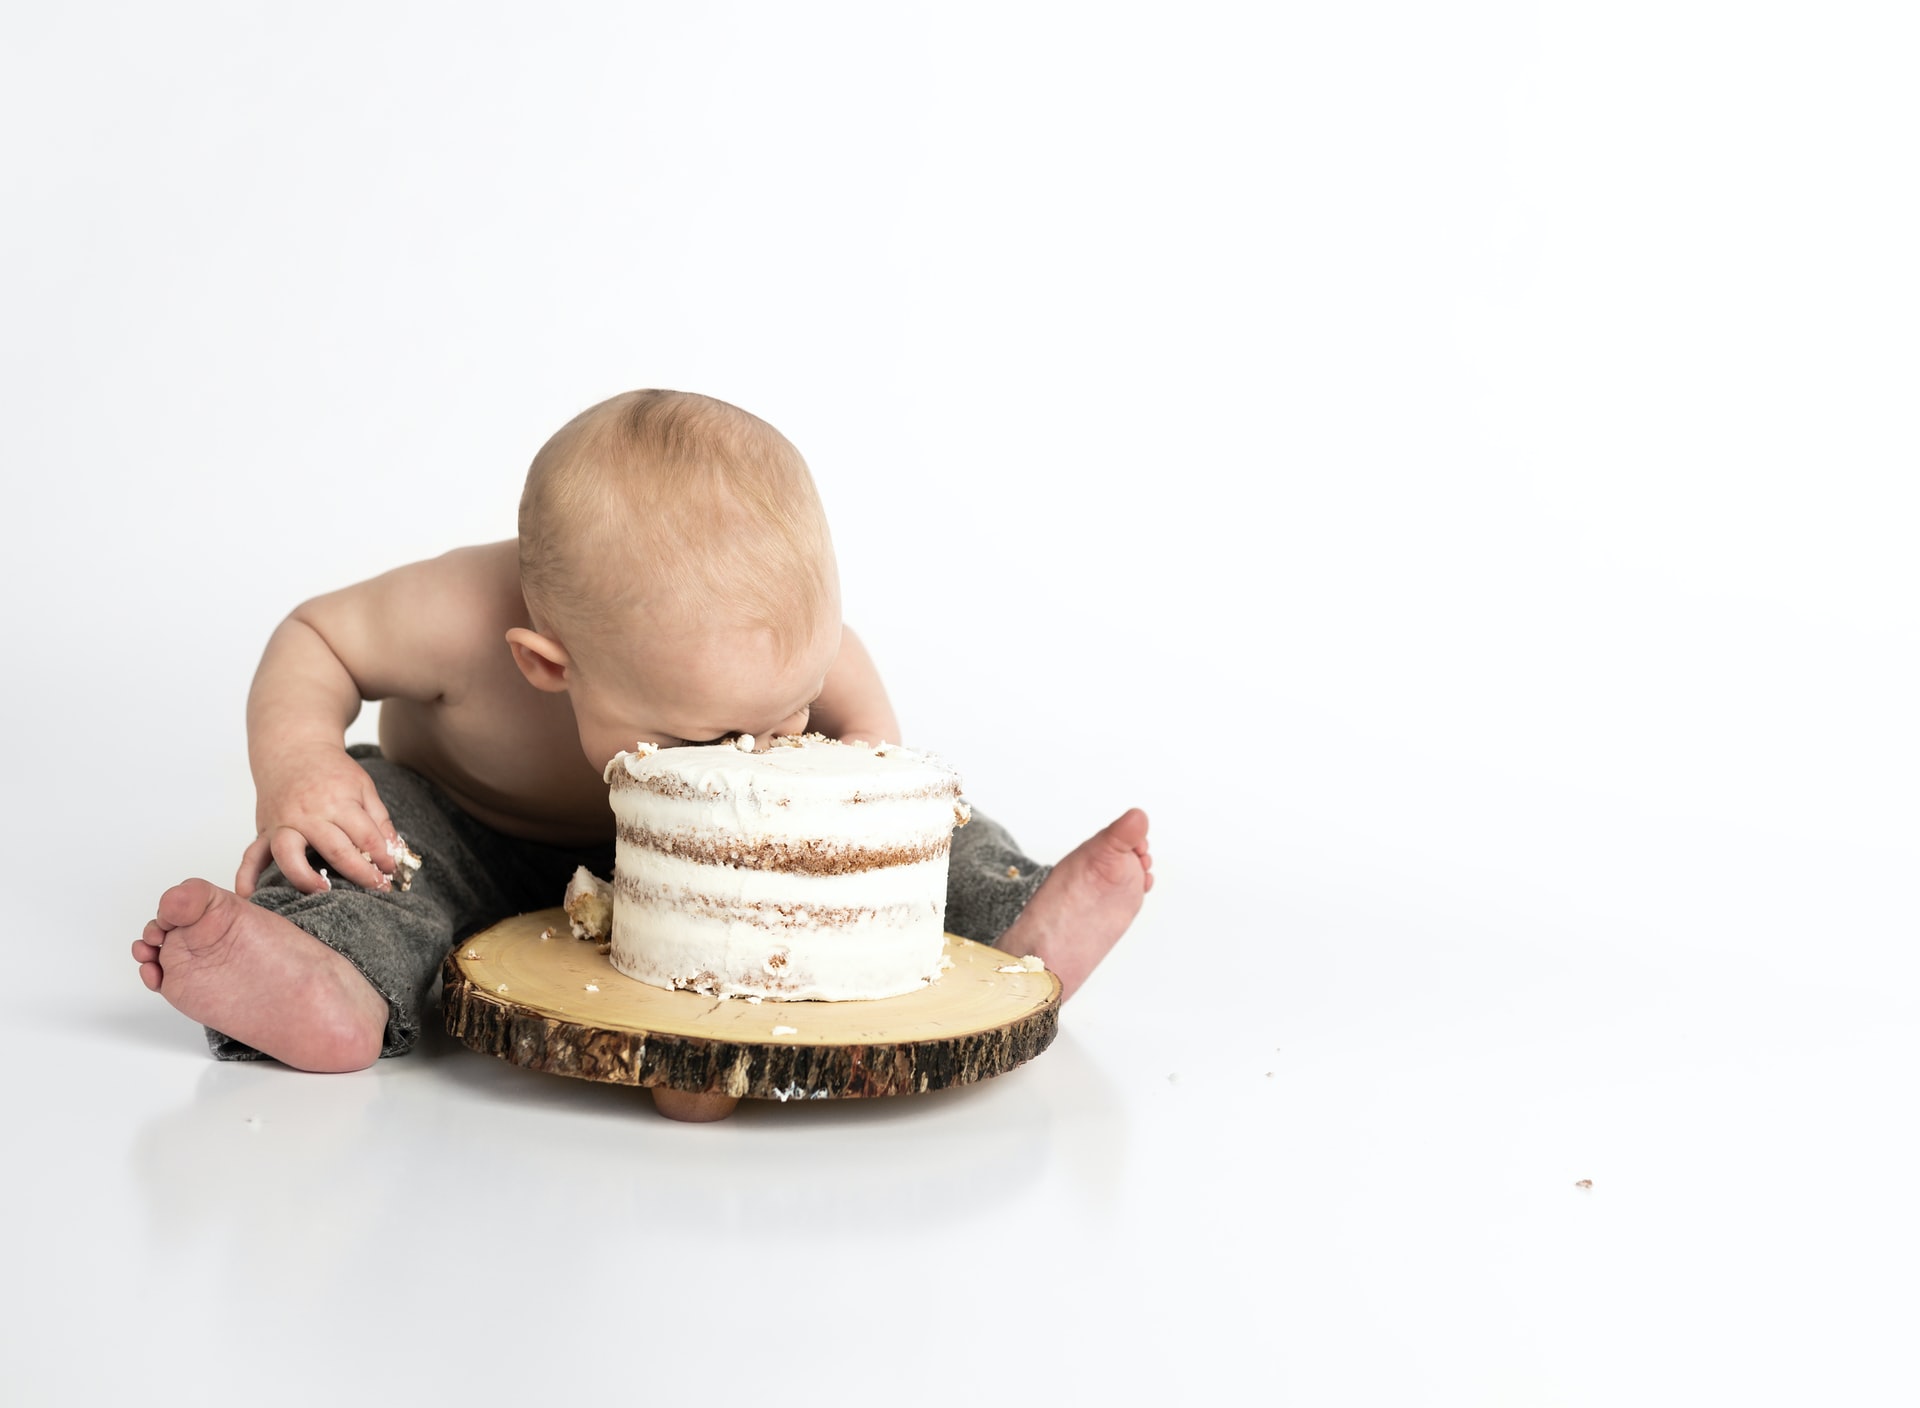 Baby chowing down on birthday cake